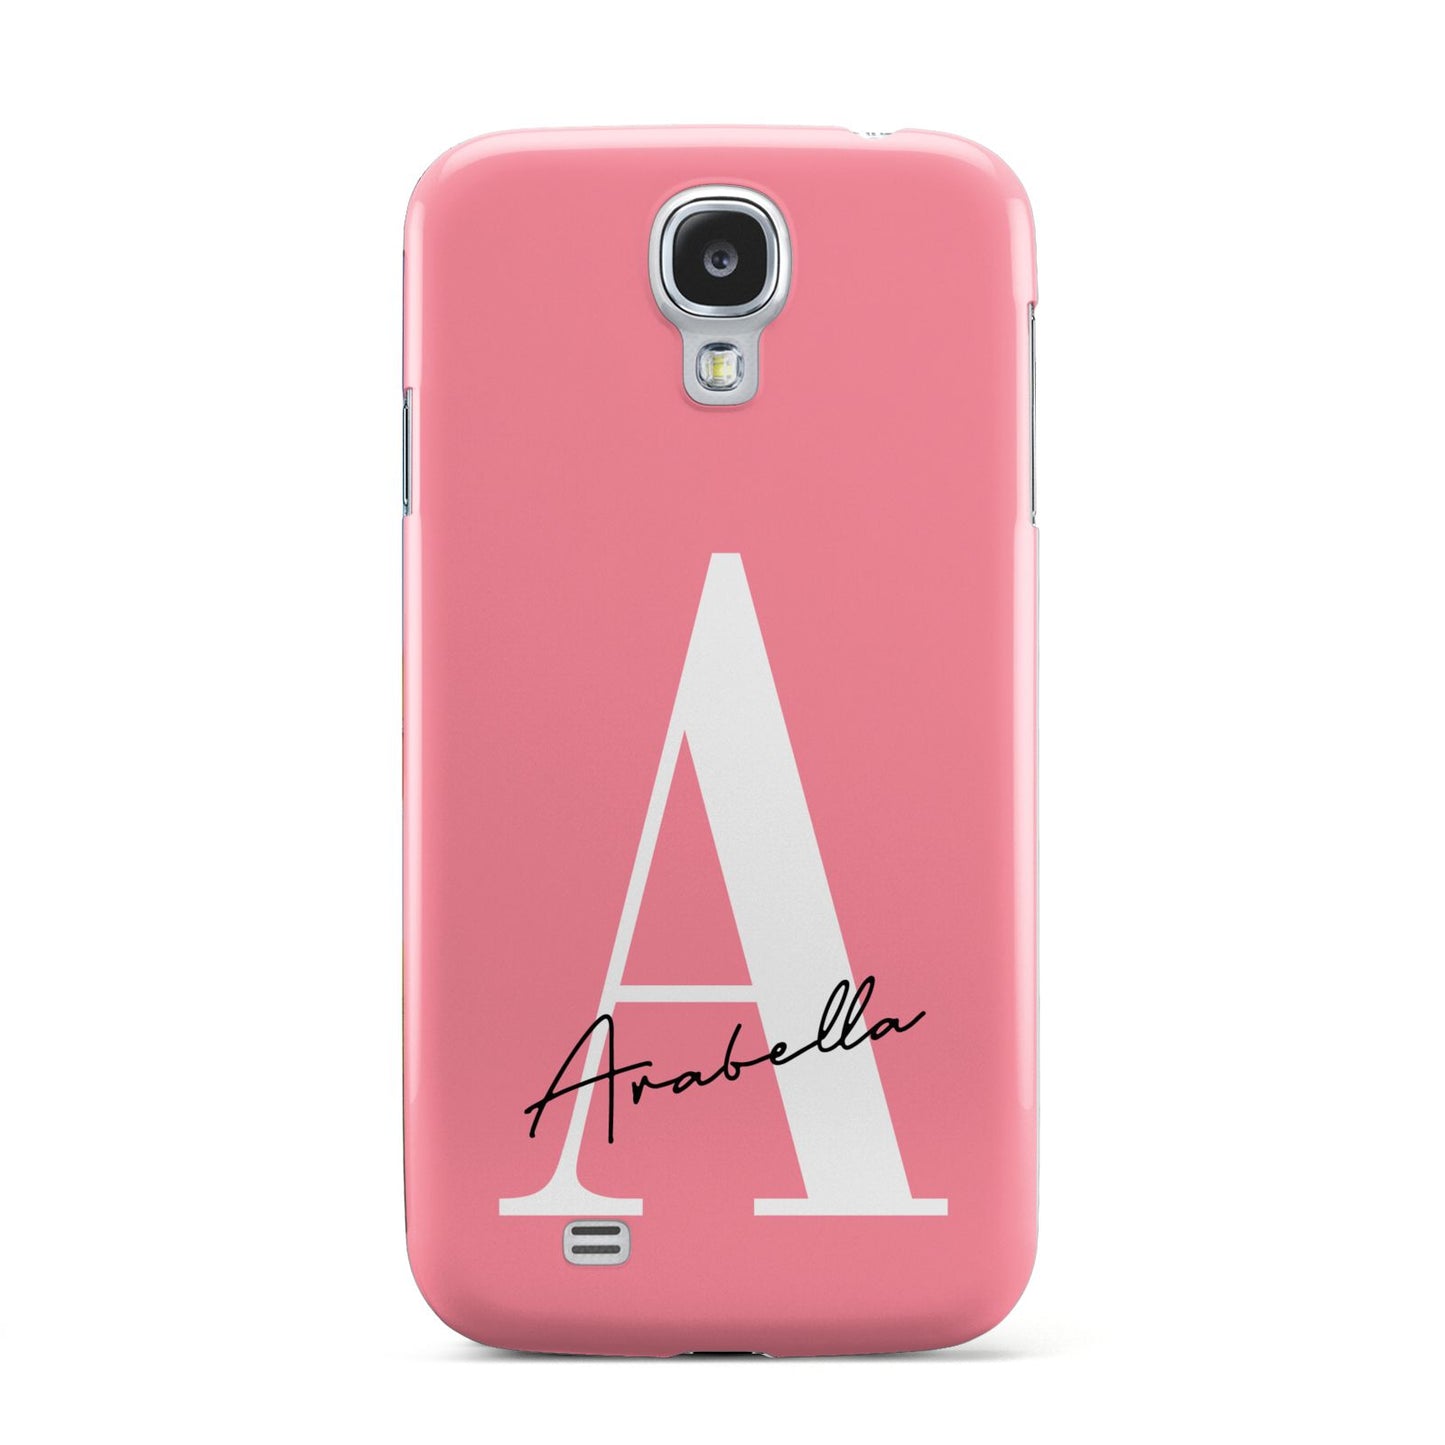 Personalised Pink White Initial Samsung Galaxy S4 Case